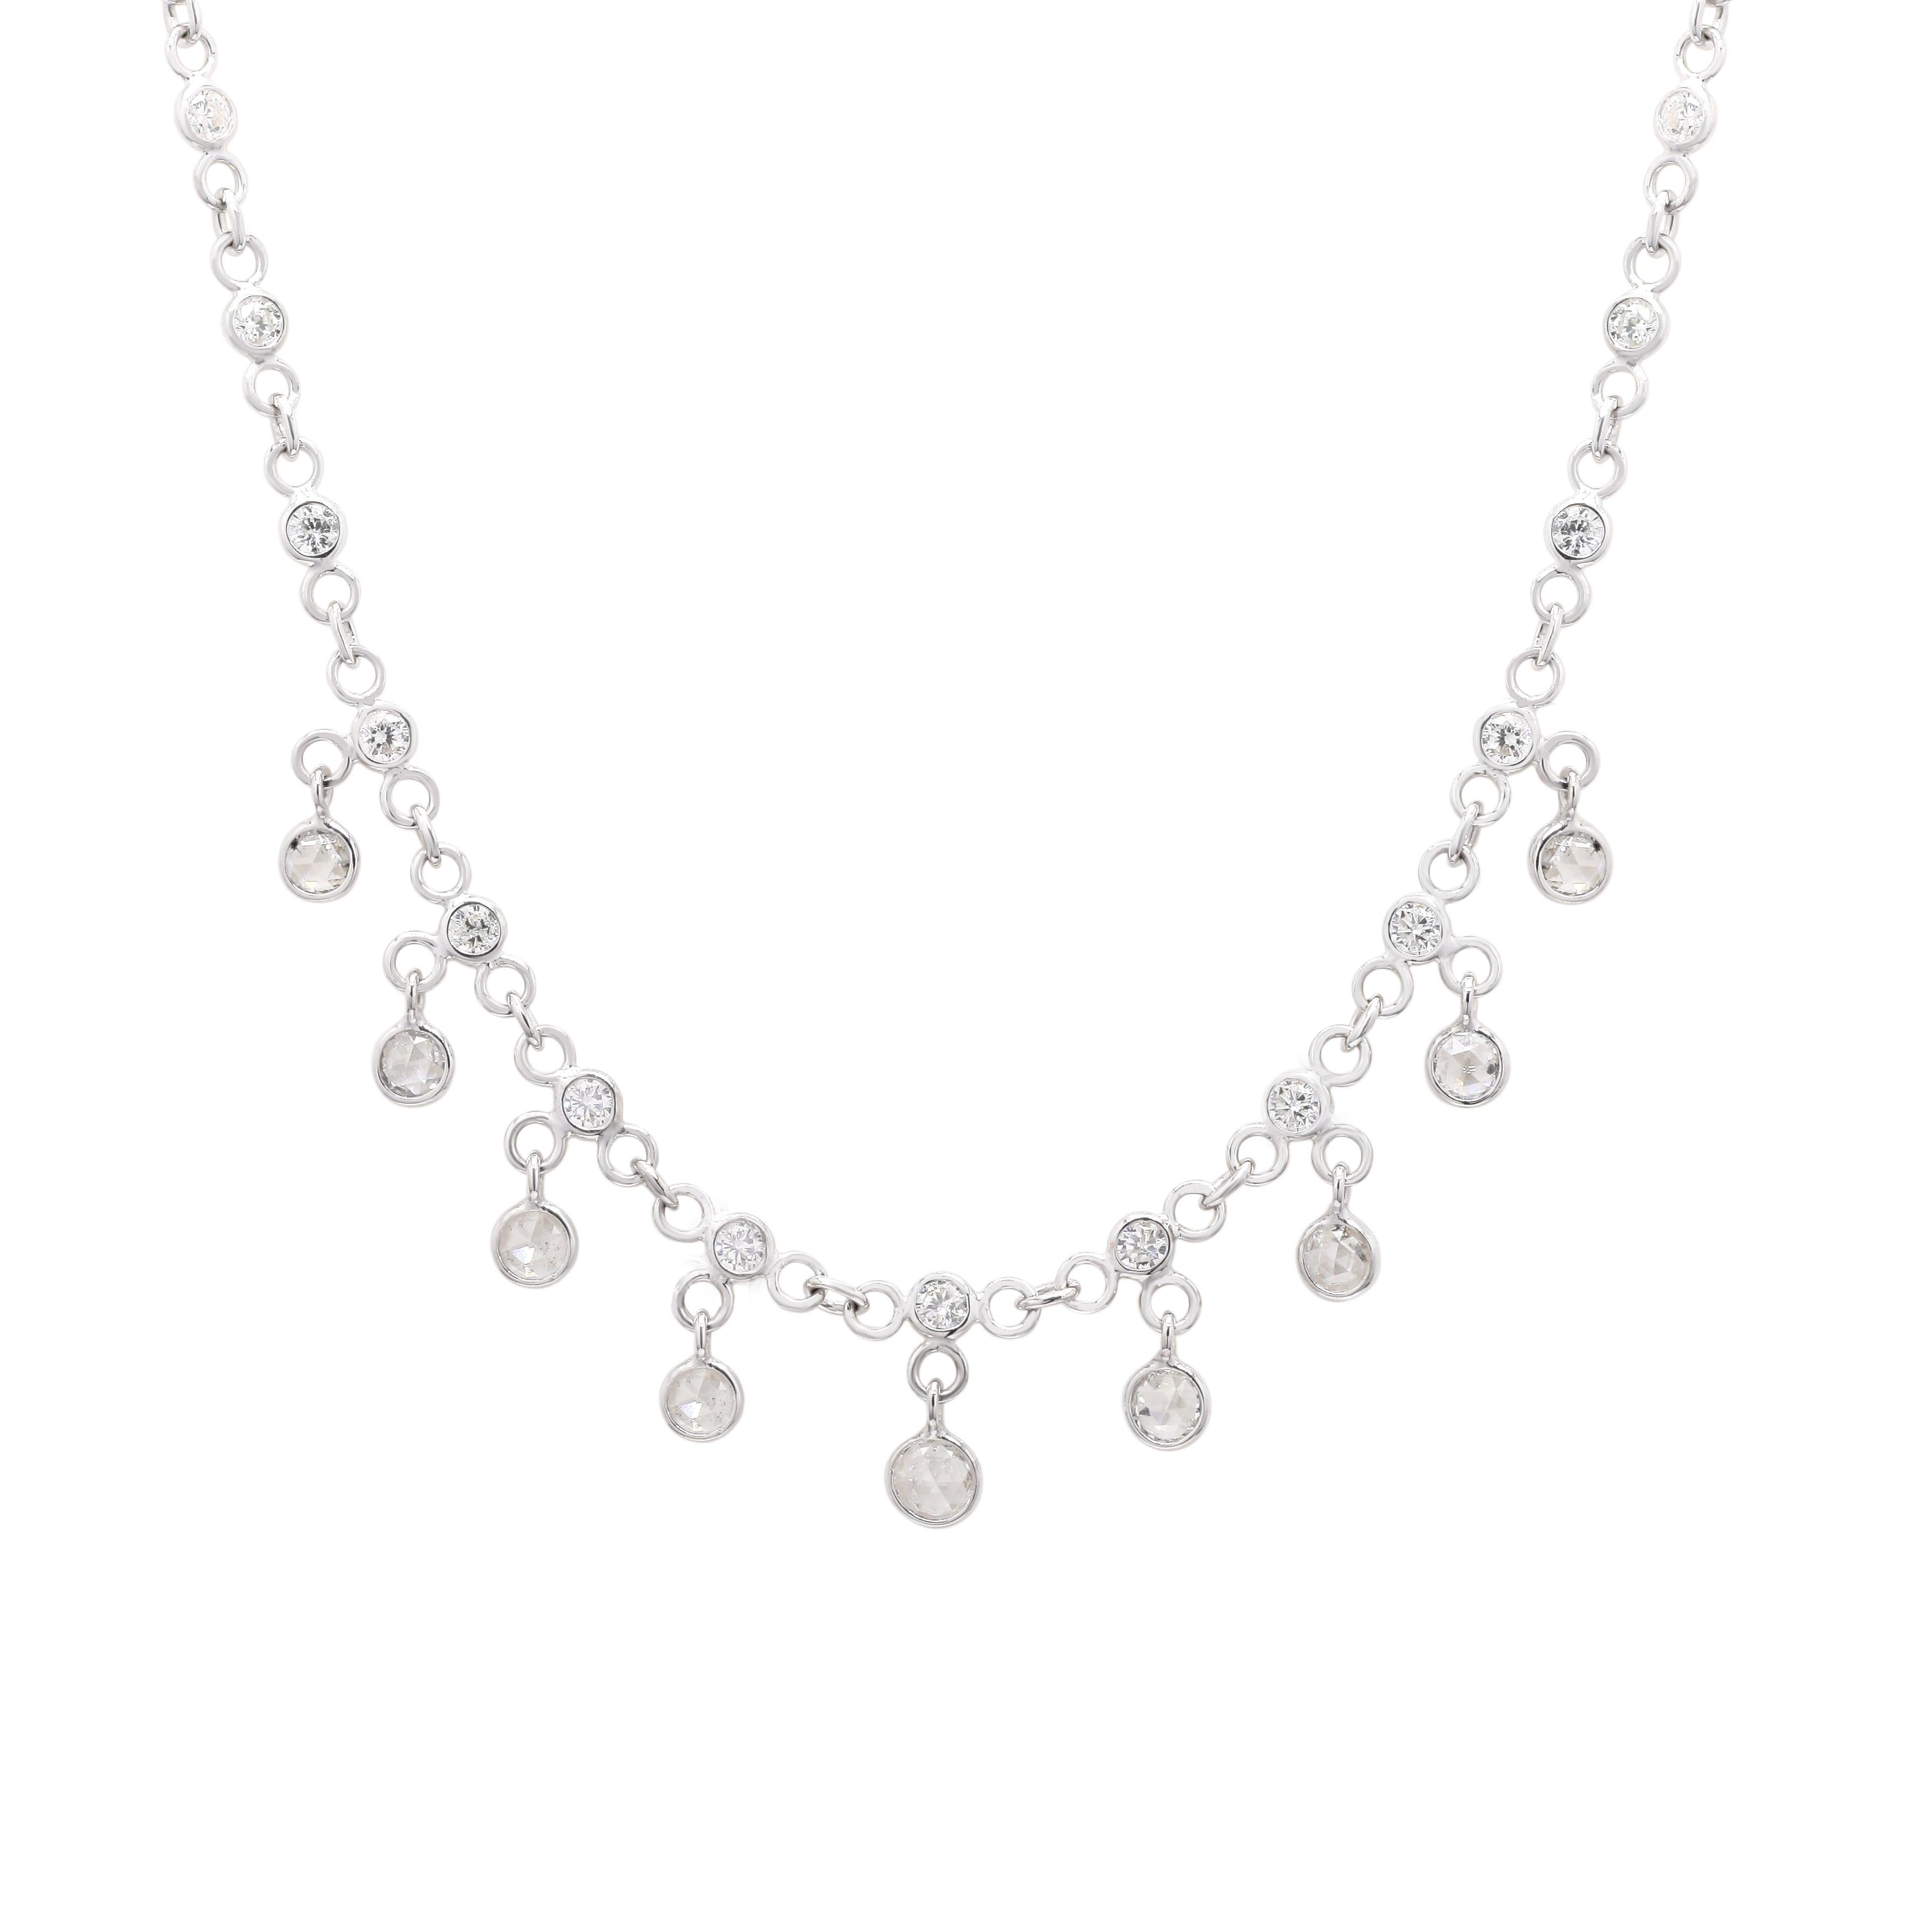 Modern 18k White Gold 2.6 Carat Genuine Diamond Chain Necklace, Christmas Gifts For Her For Sale